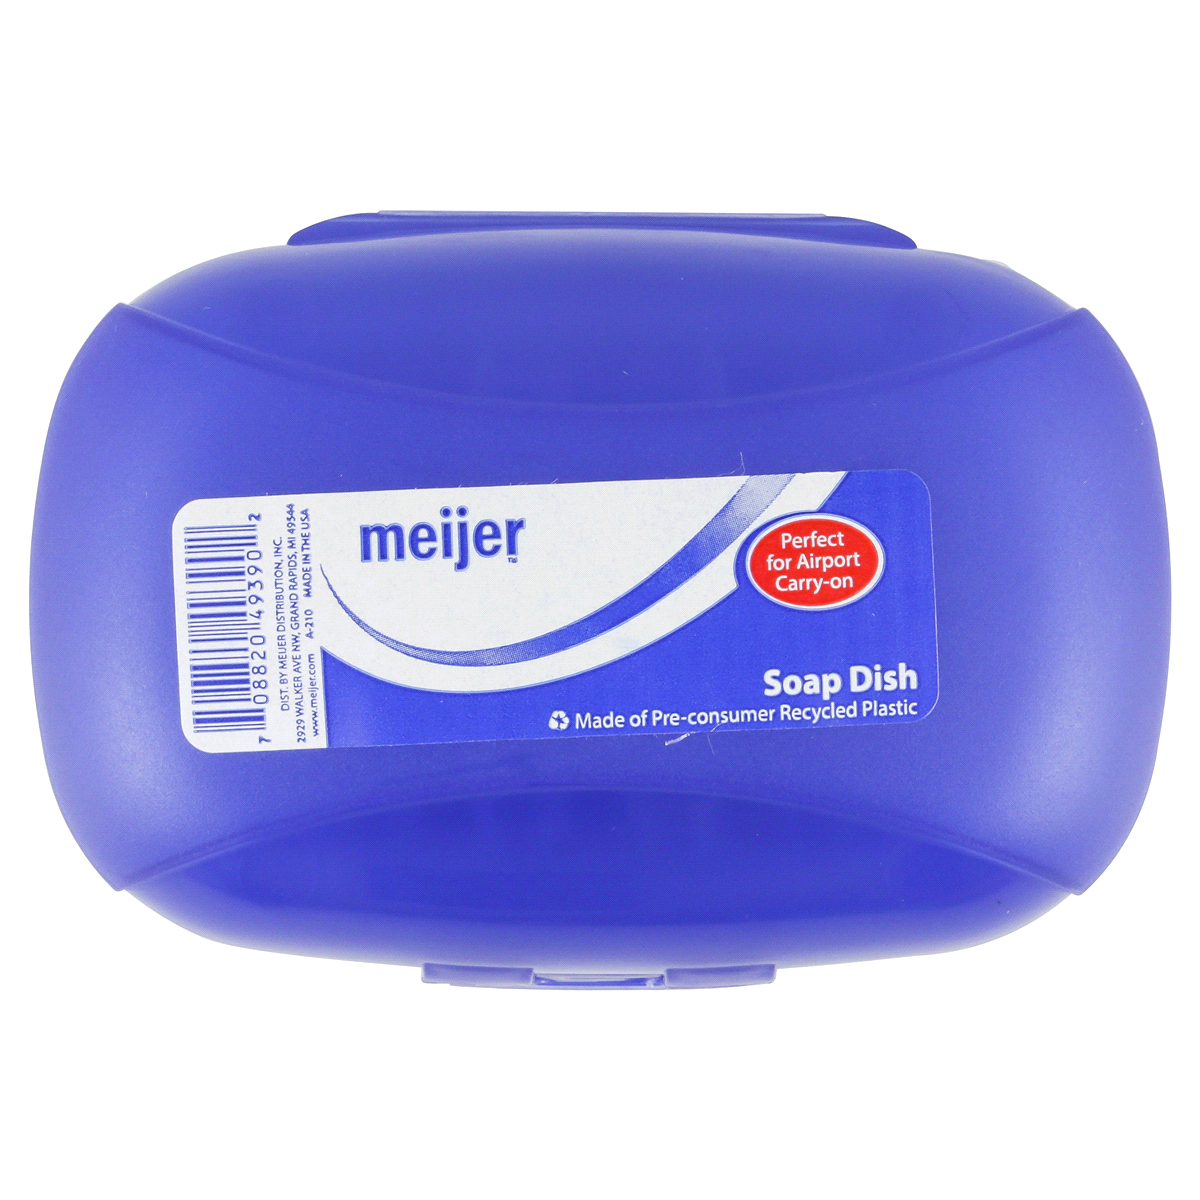 slide 2 of 2, Meijer Trial & Travel Frosted Plastic Oval Soap Box, 1 ct